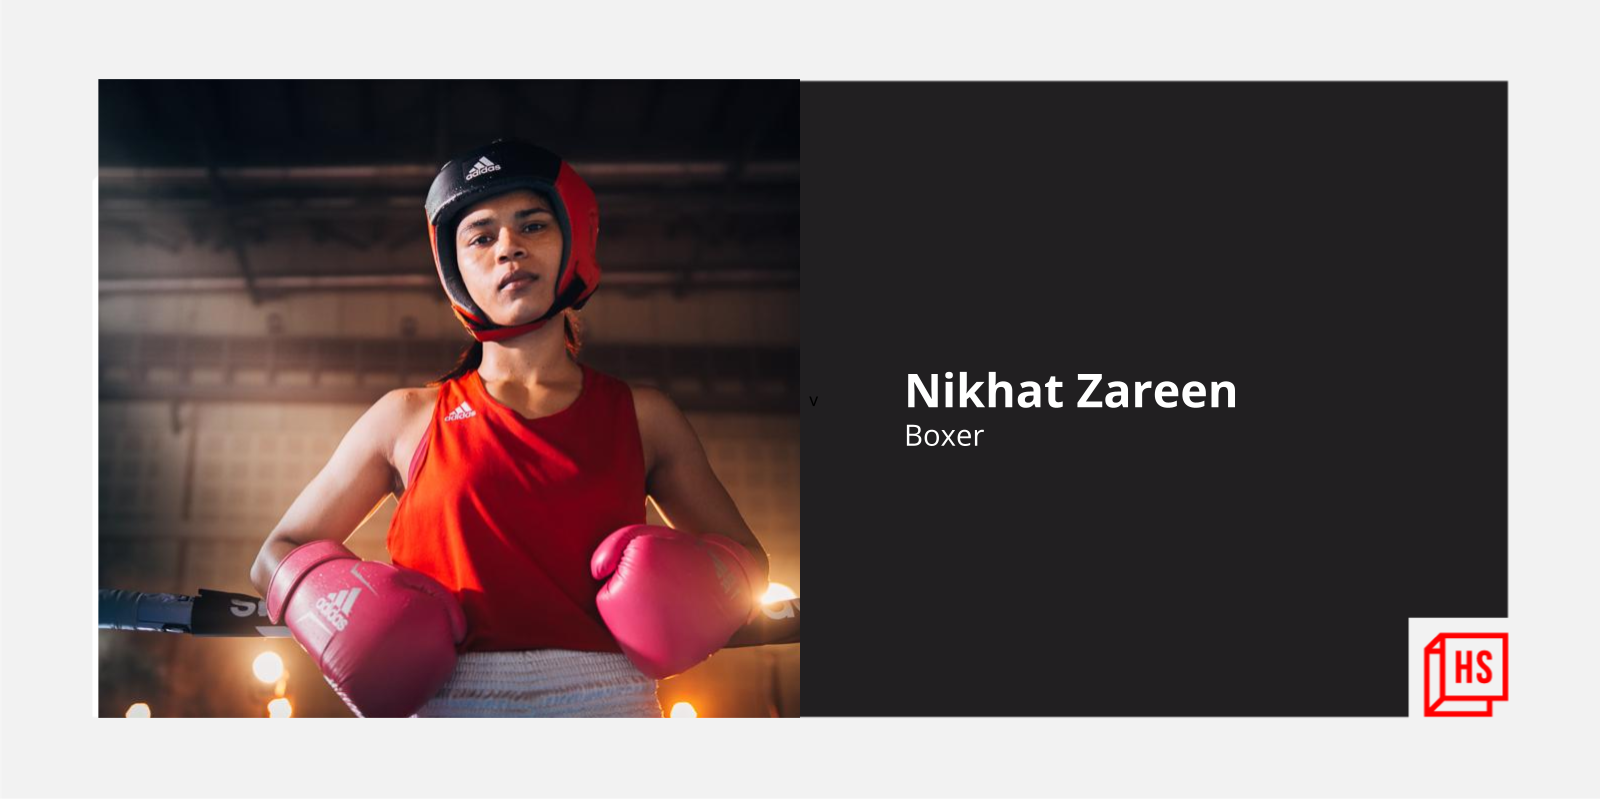 How boxer Nikhat Zareen is punching stereotypes, one successful bout at a time

